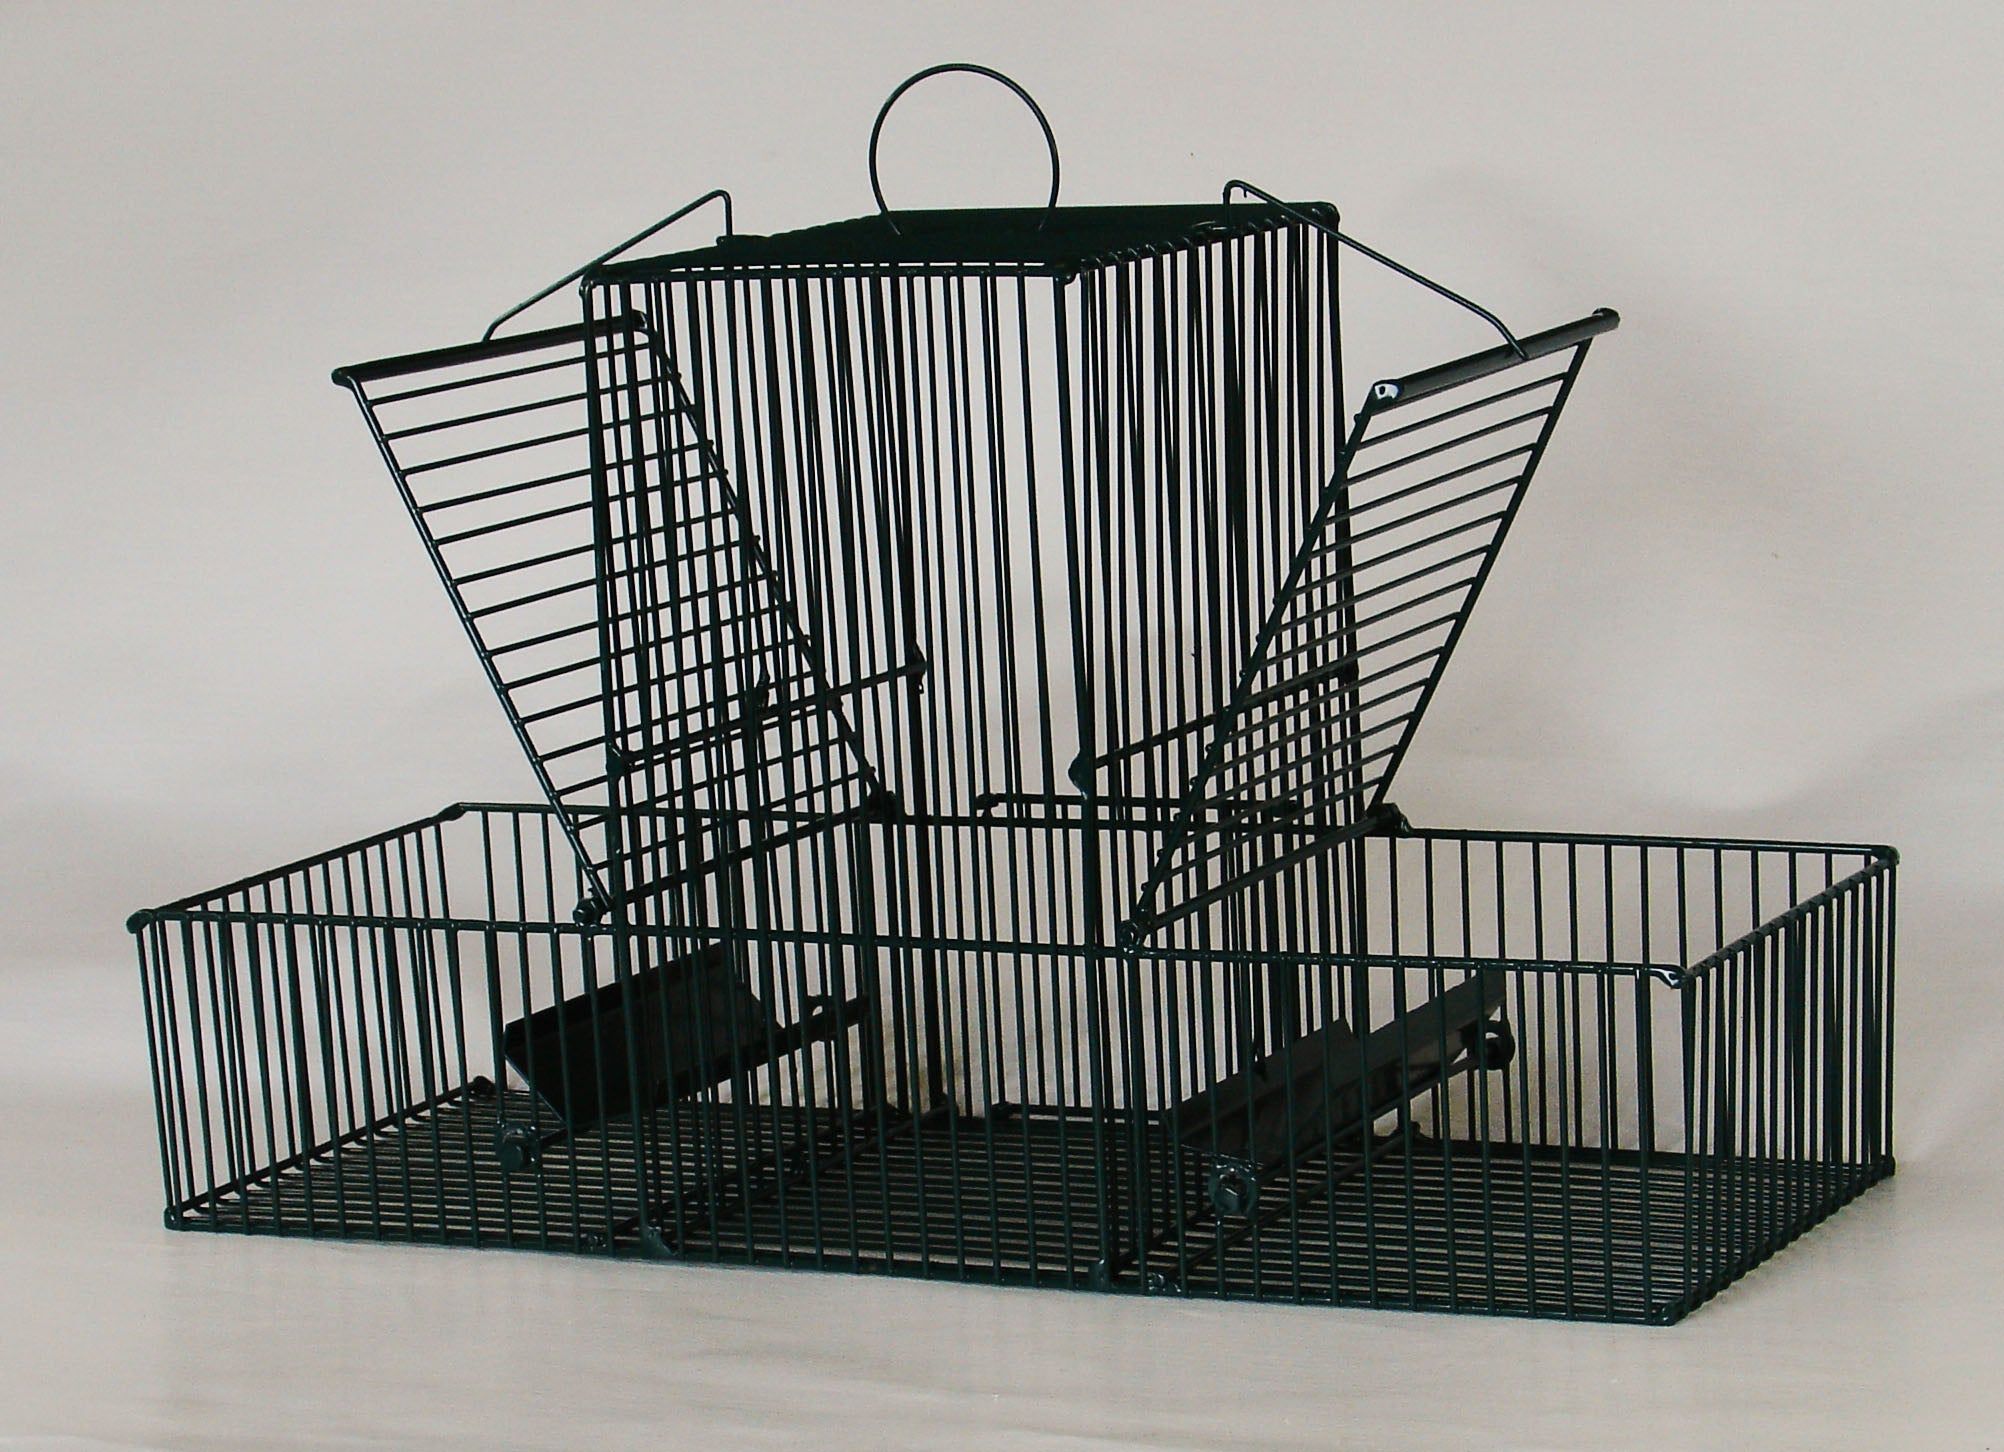 Kage-All® Bird Trap, Kage-All